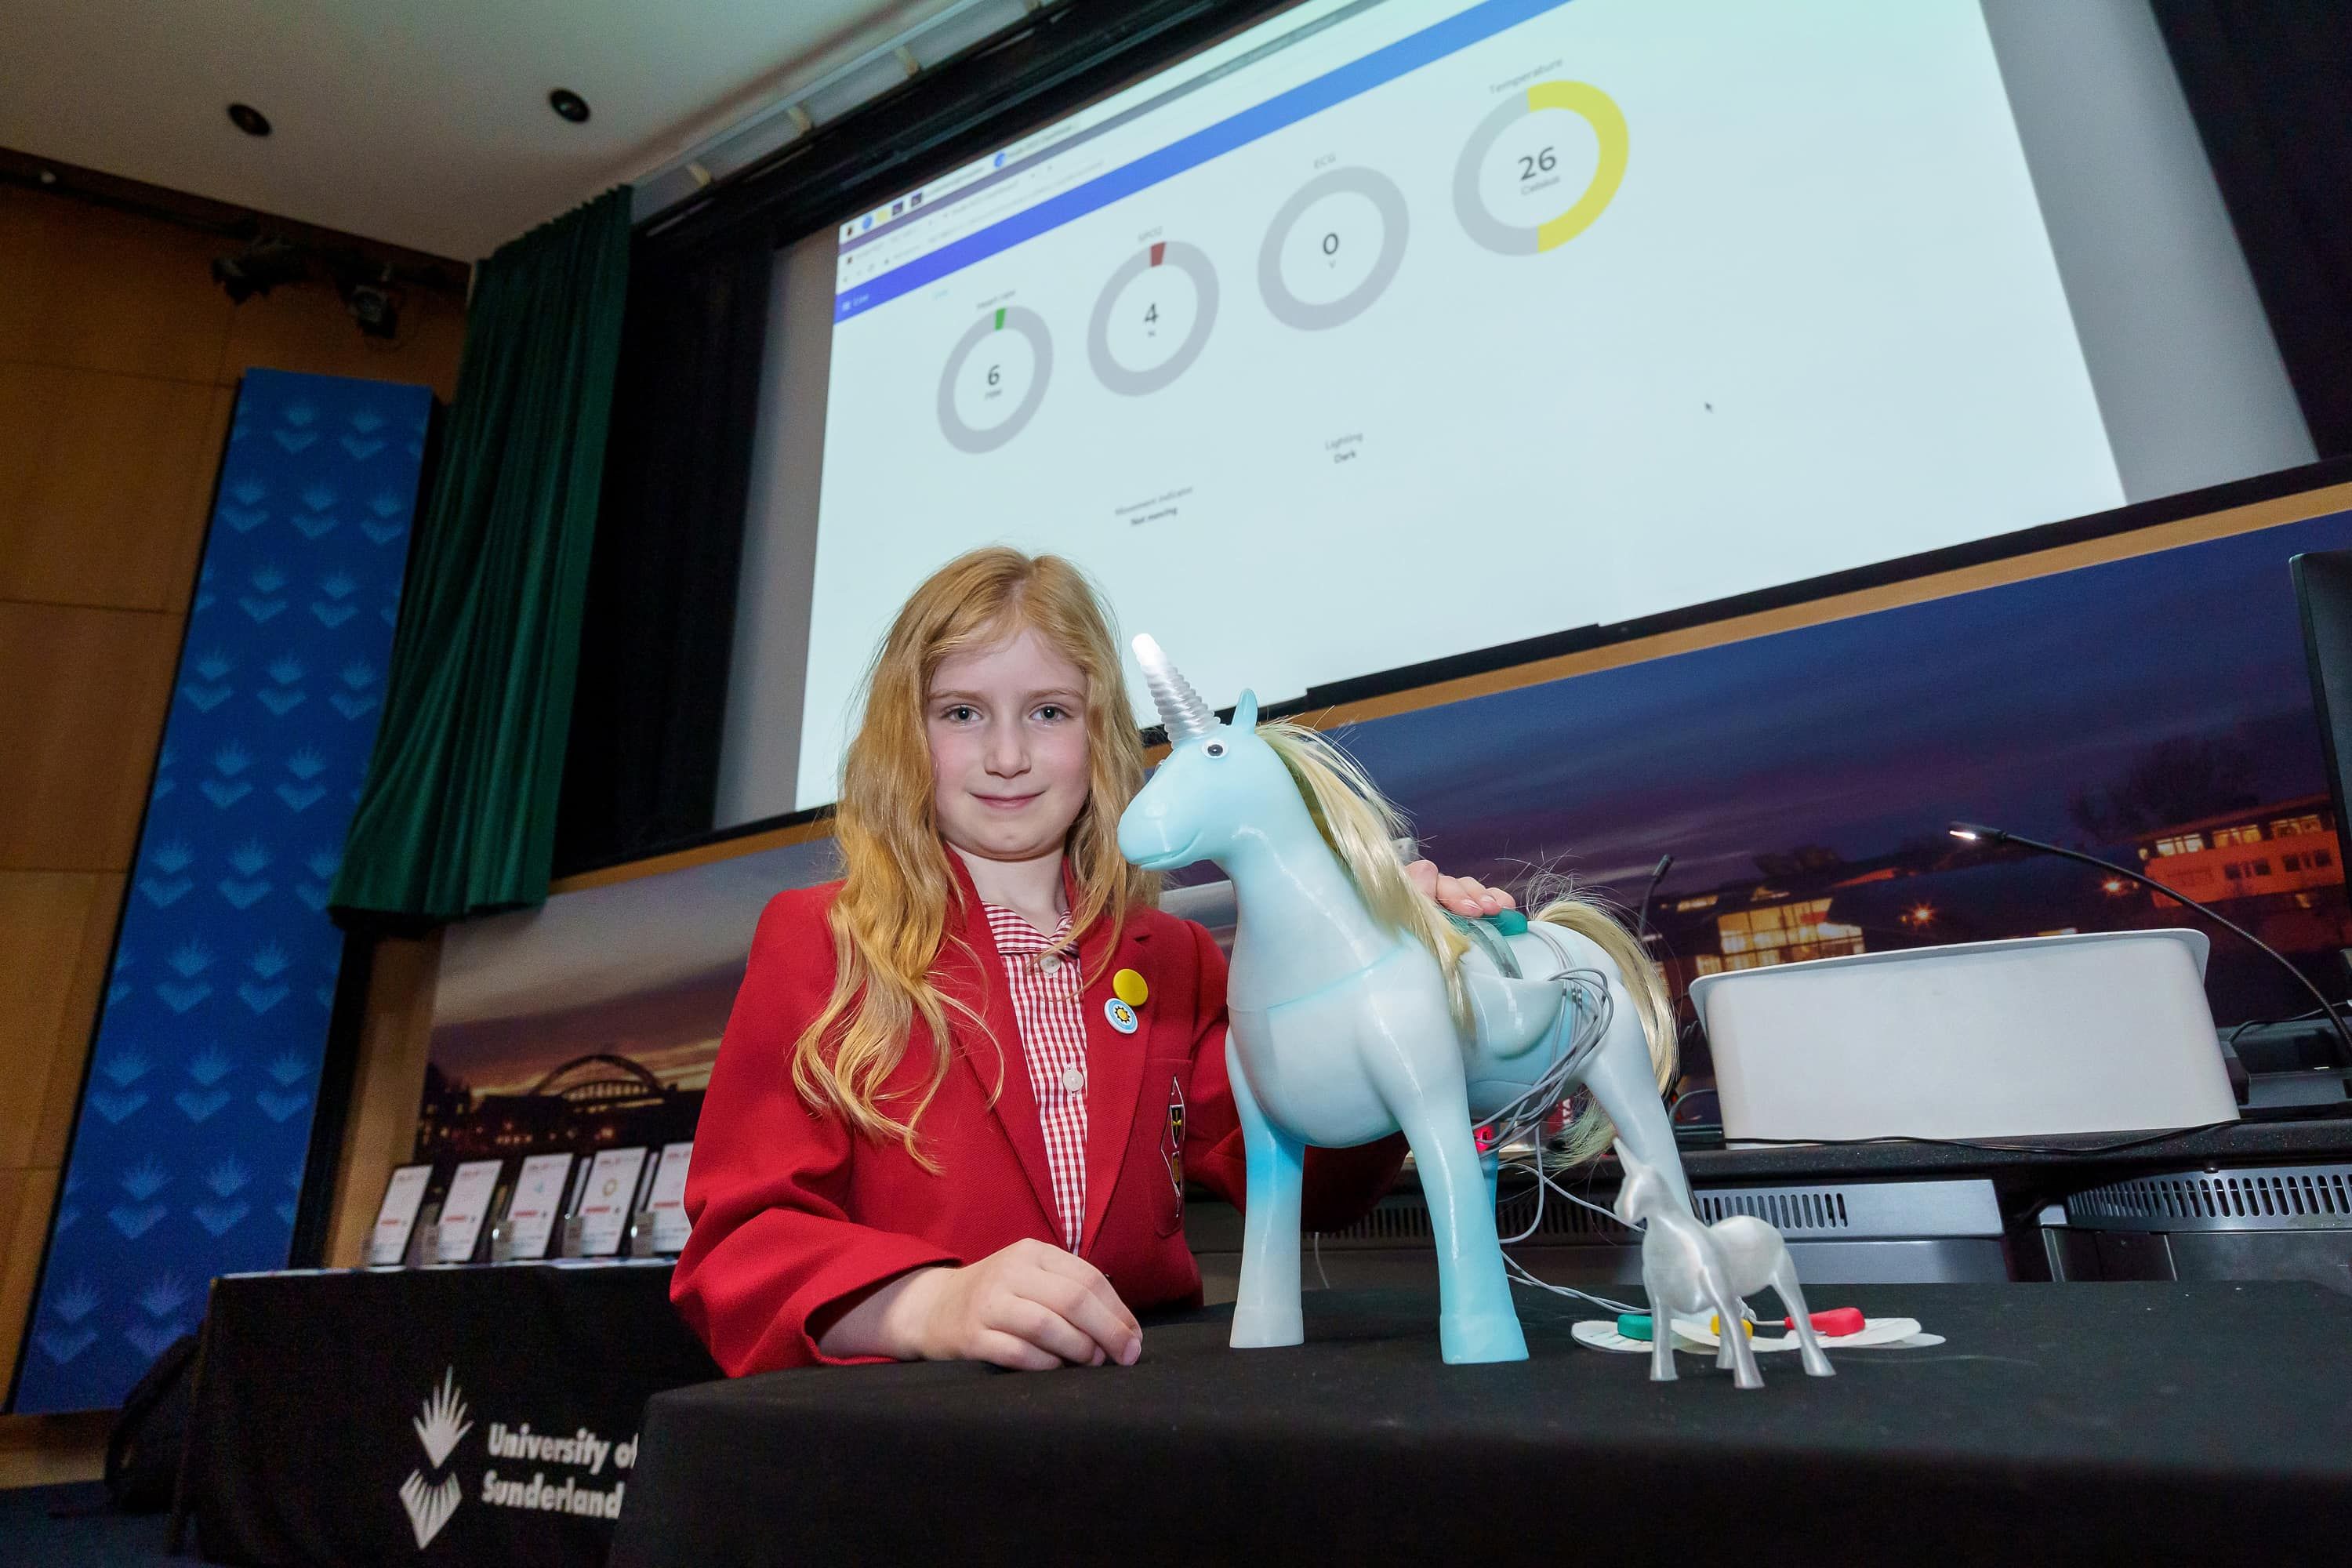 Francesca Mobberley standing with her Unicorn Health Bot